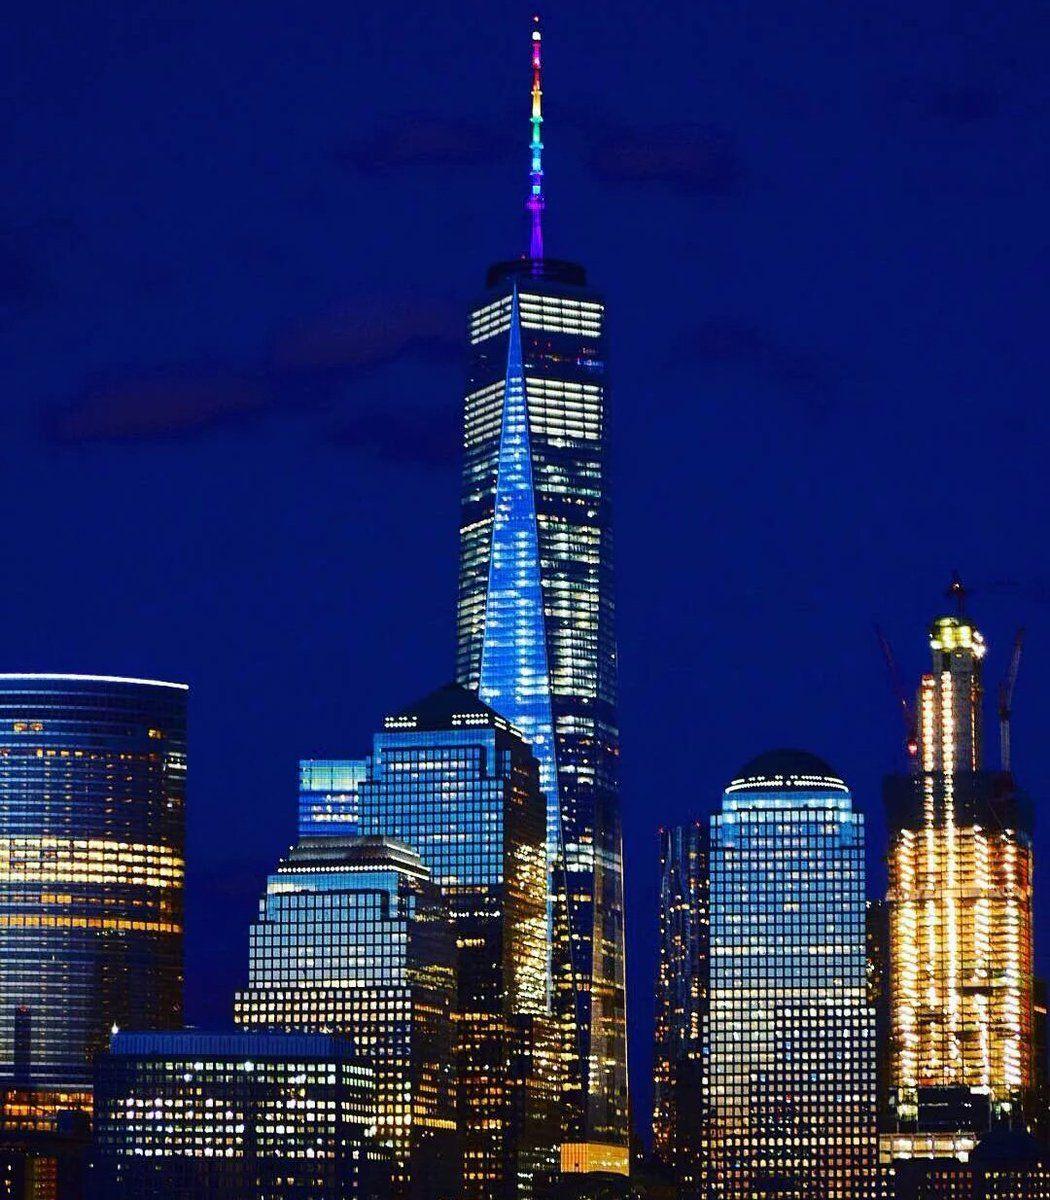 Tonight: Change the color of One World Trade Center's spire